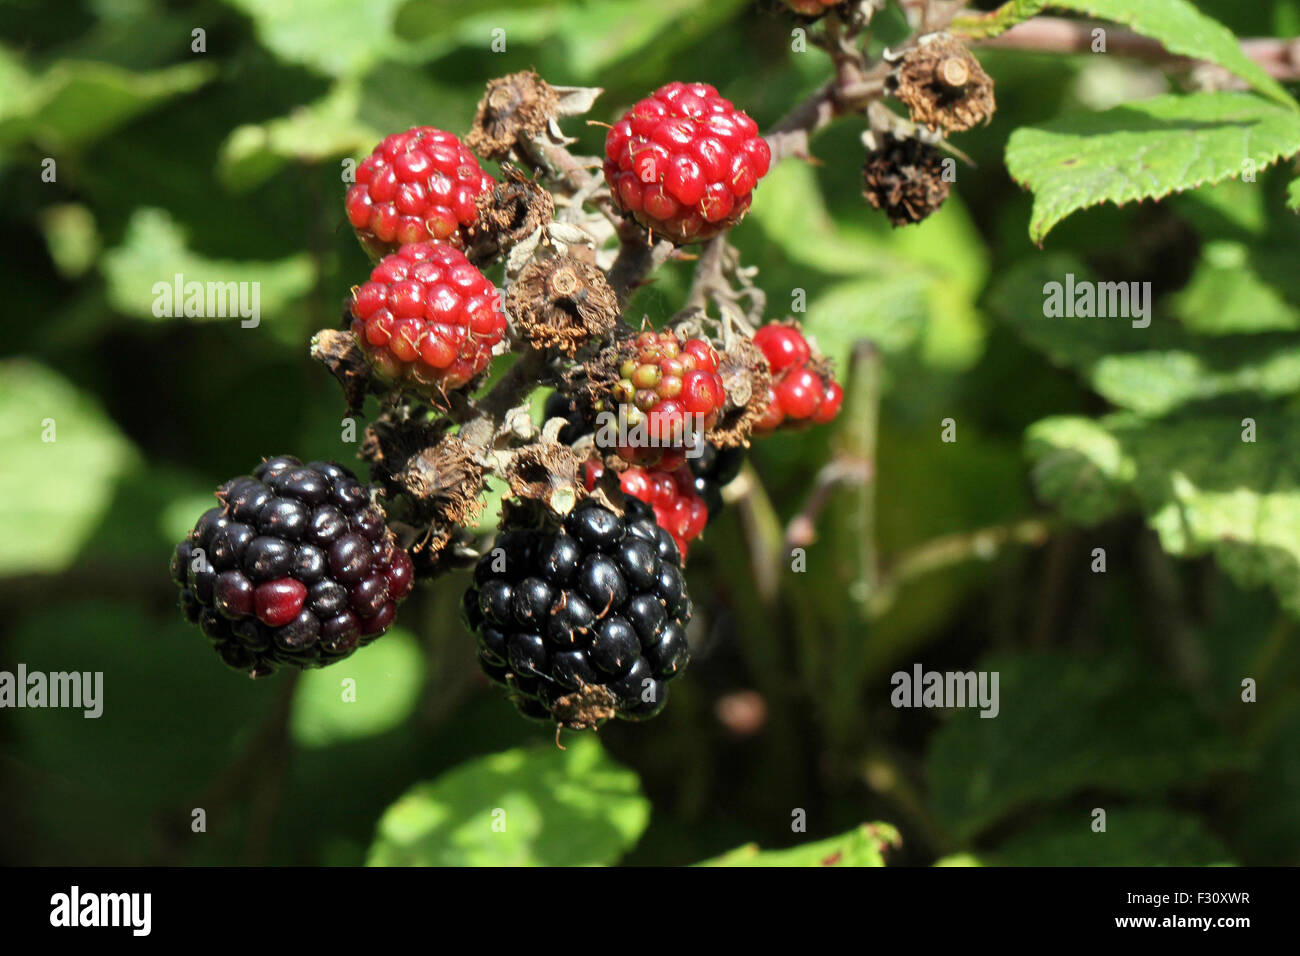 Close up photo of a bunch of blackberries. Stock Photo